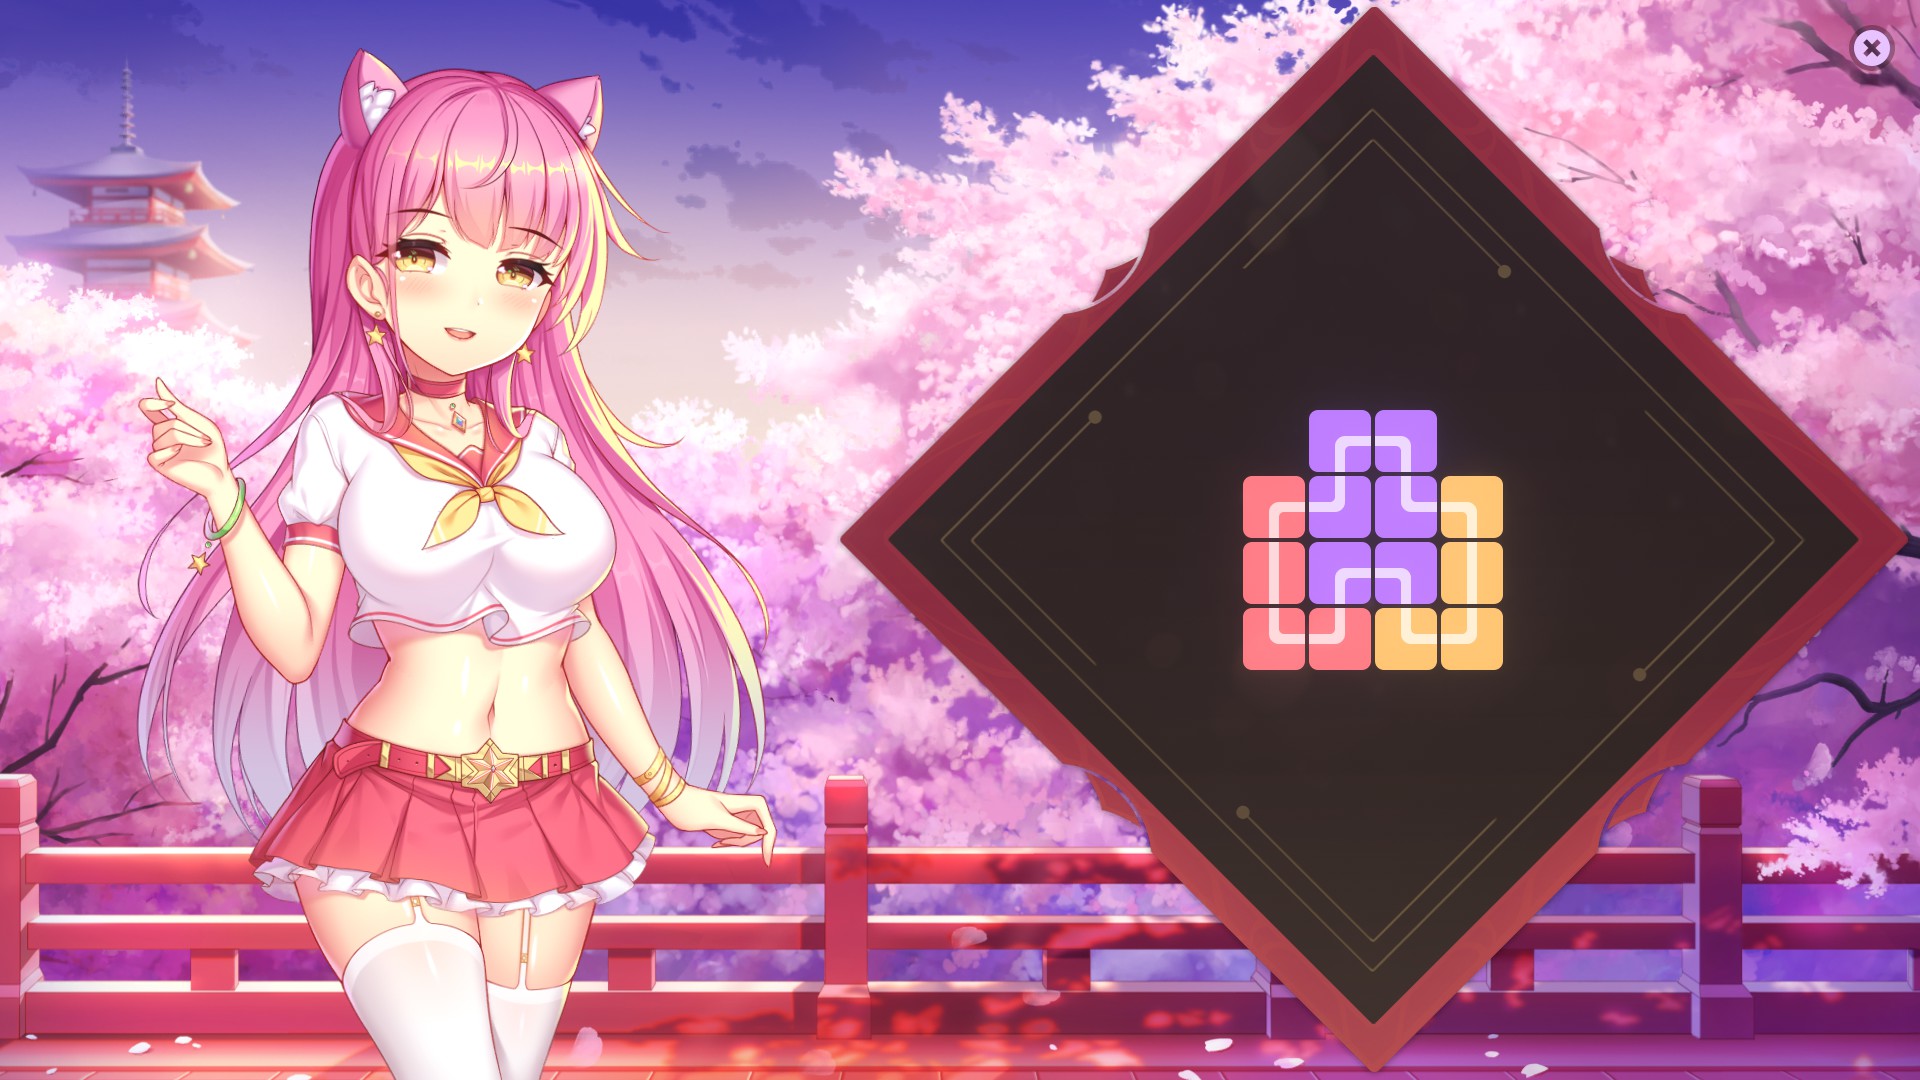 Sakura Hime 2 Achievement Guide - Images of completed levels - CCEECA1